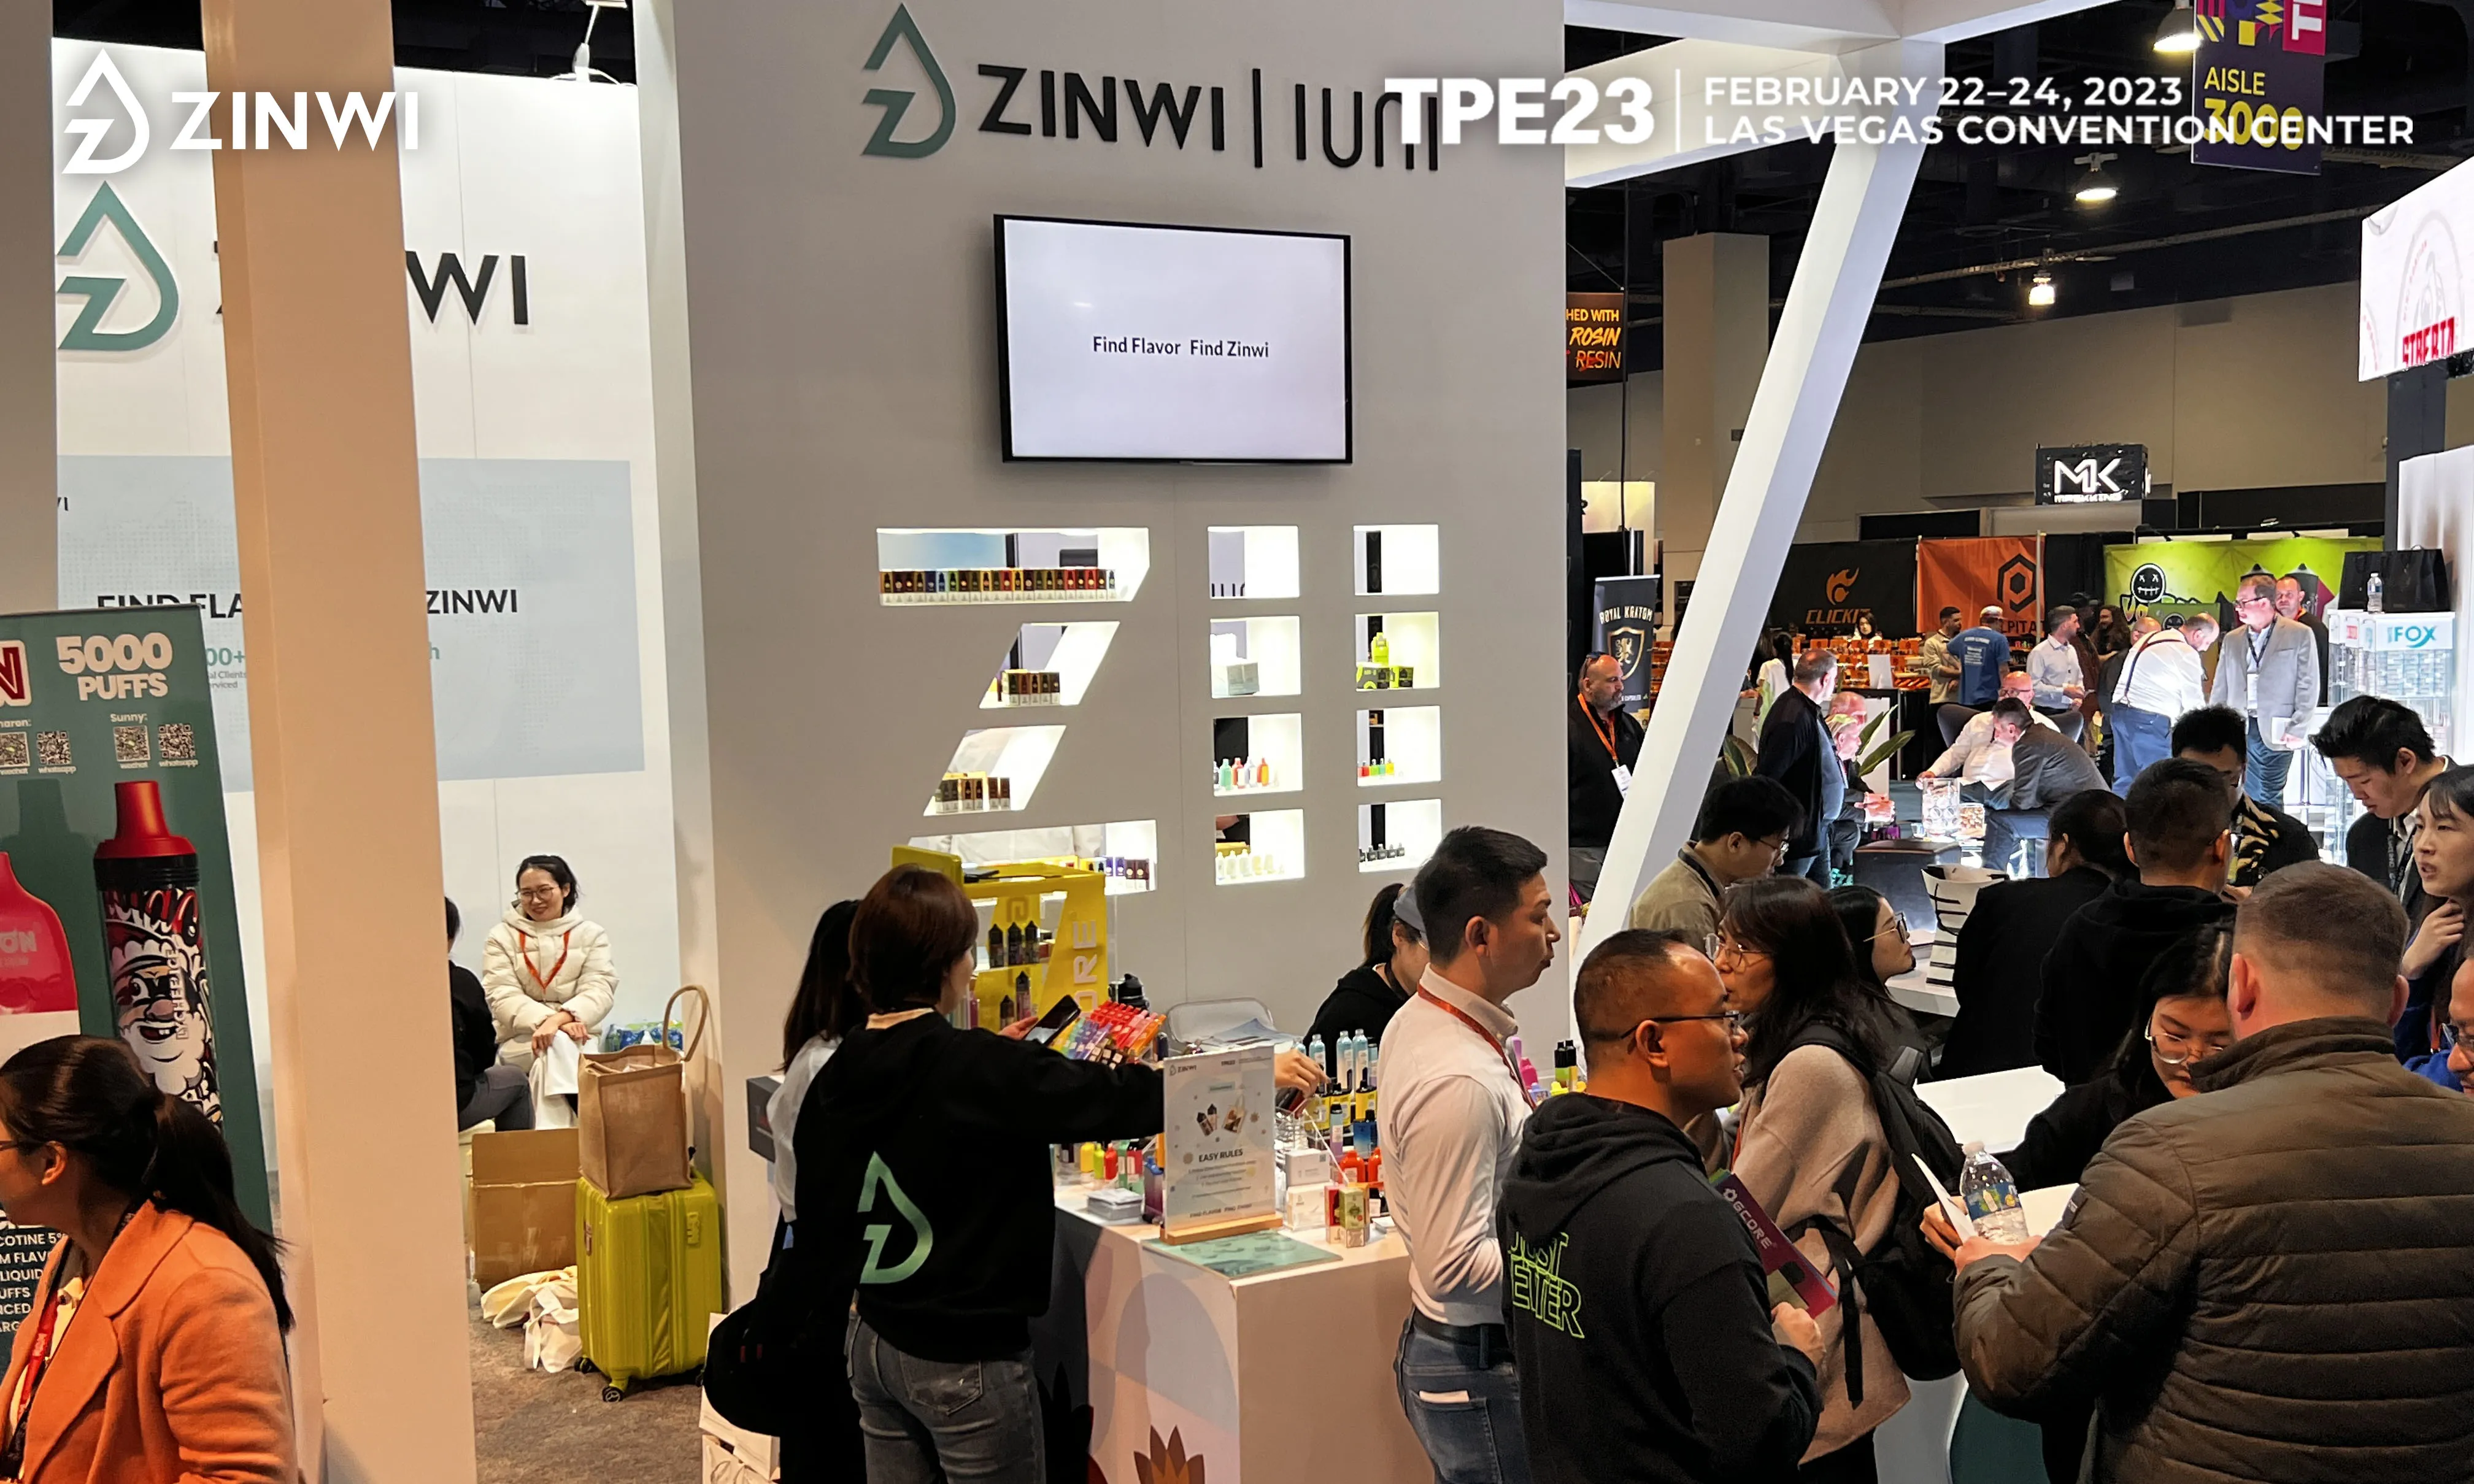 The dazzling "Zinwi Blue" makes Zinwi Biotech attract the attention of many exhibitors with its new brand image and unique color logo.